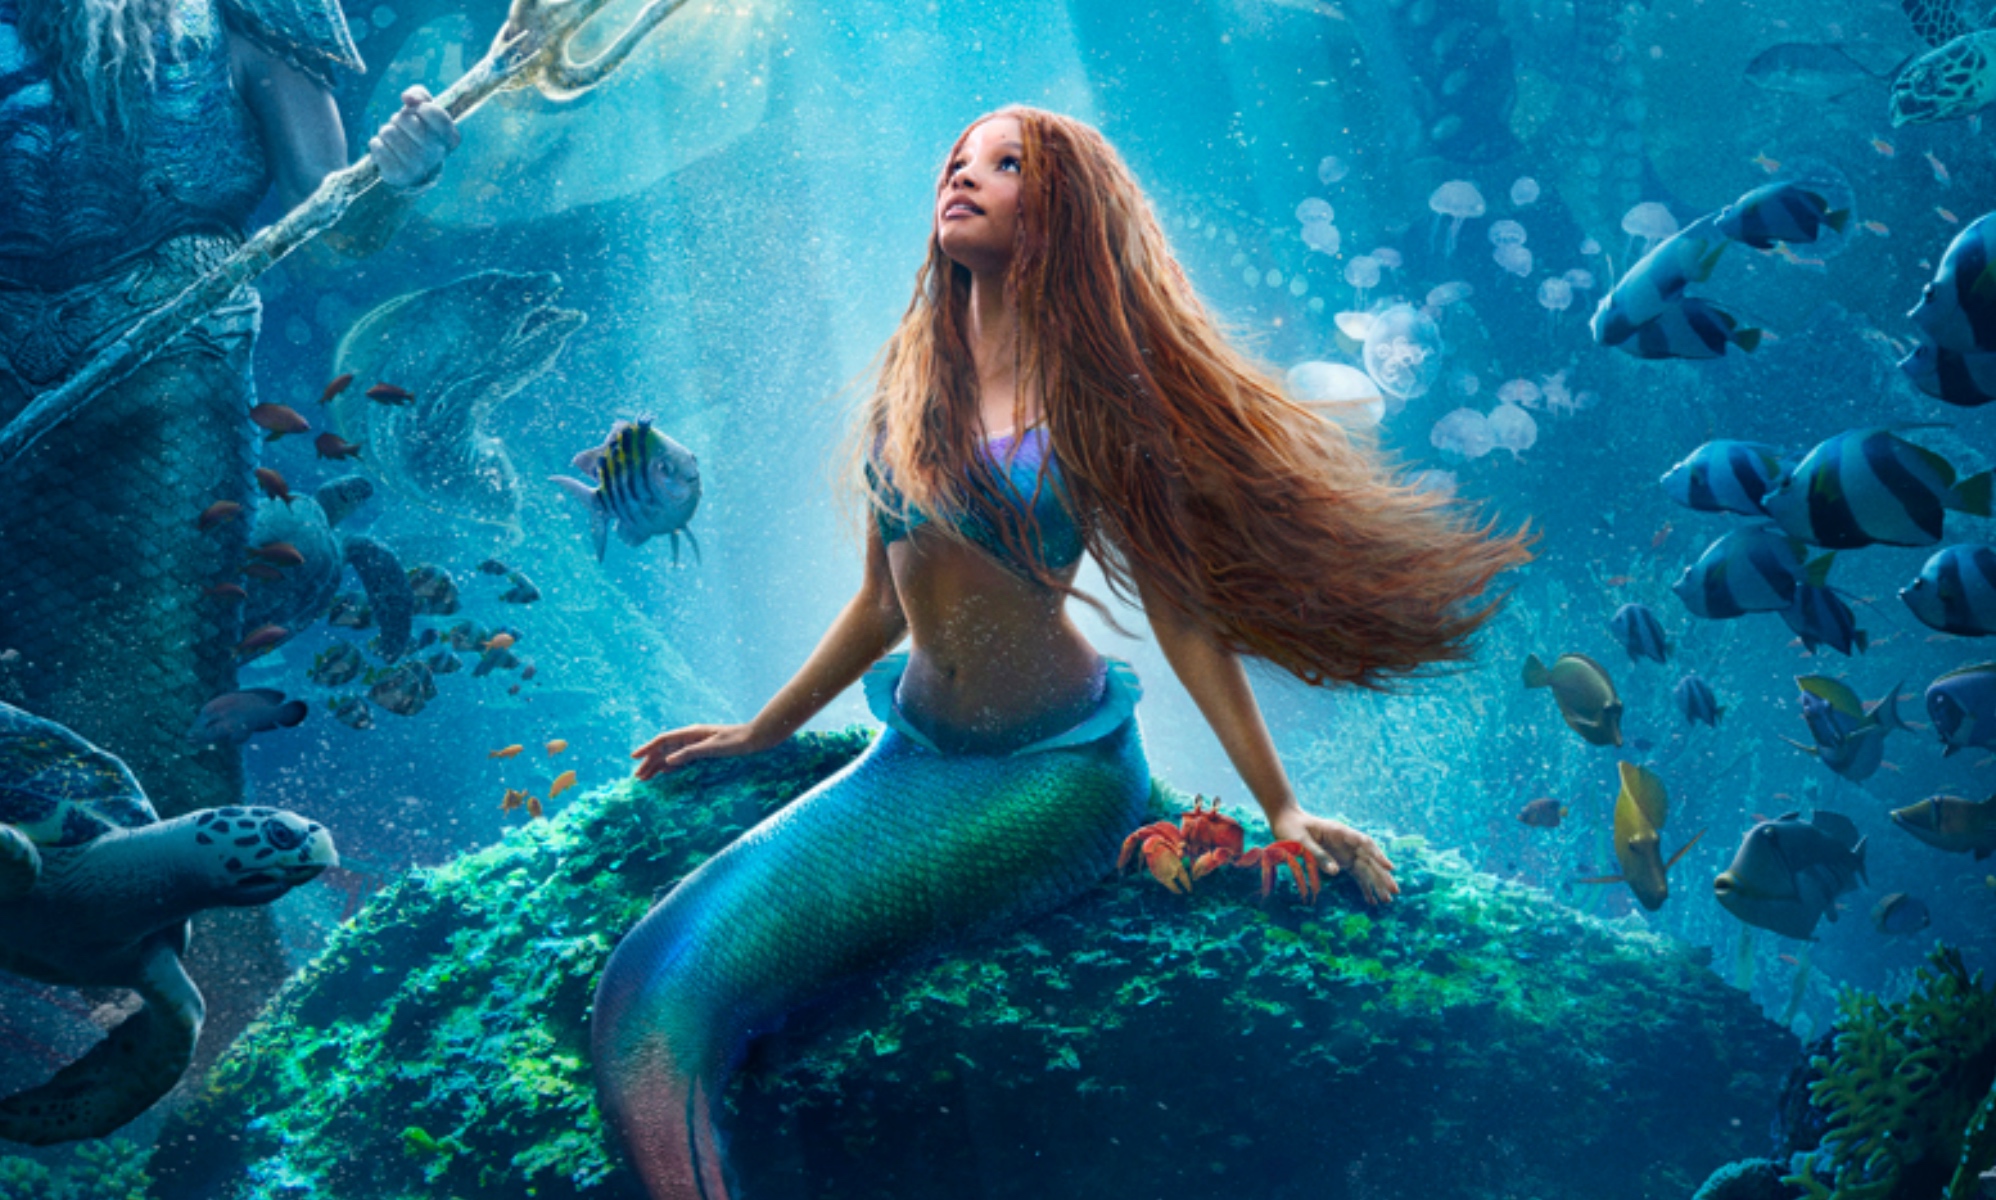 17 Disney Live-Action Remakes for the Fan in All of Us